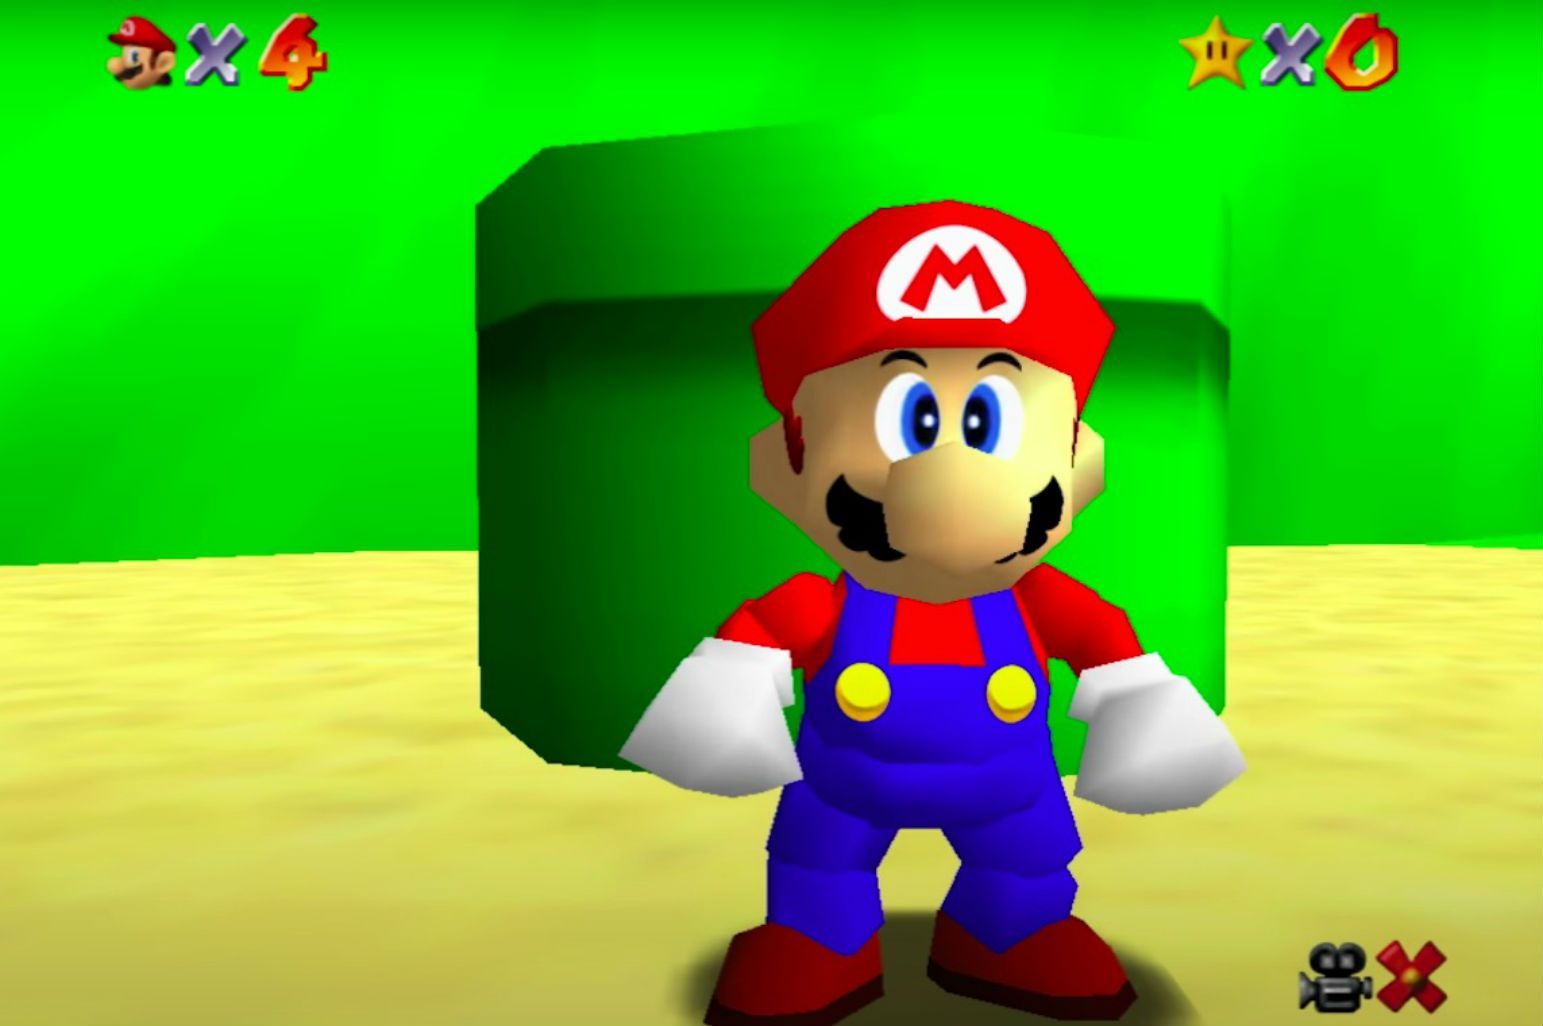 can you get mario 64 on the switch